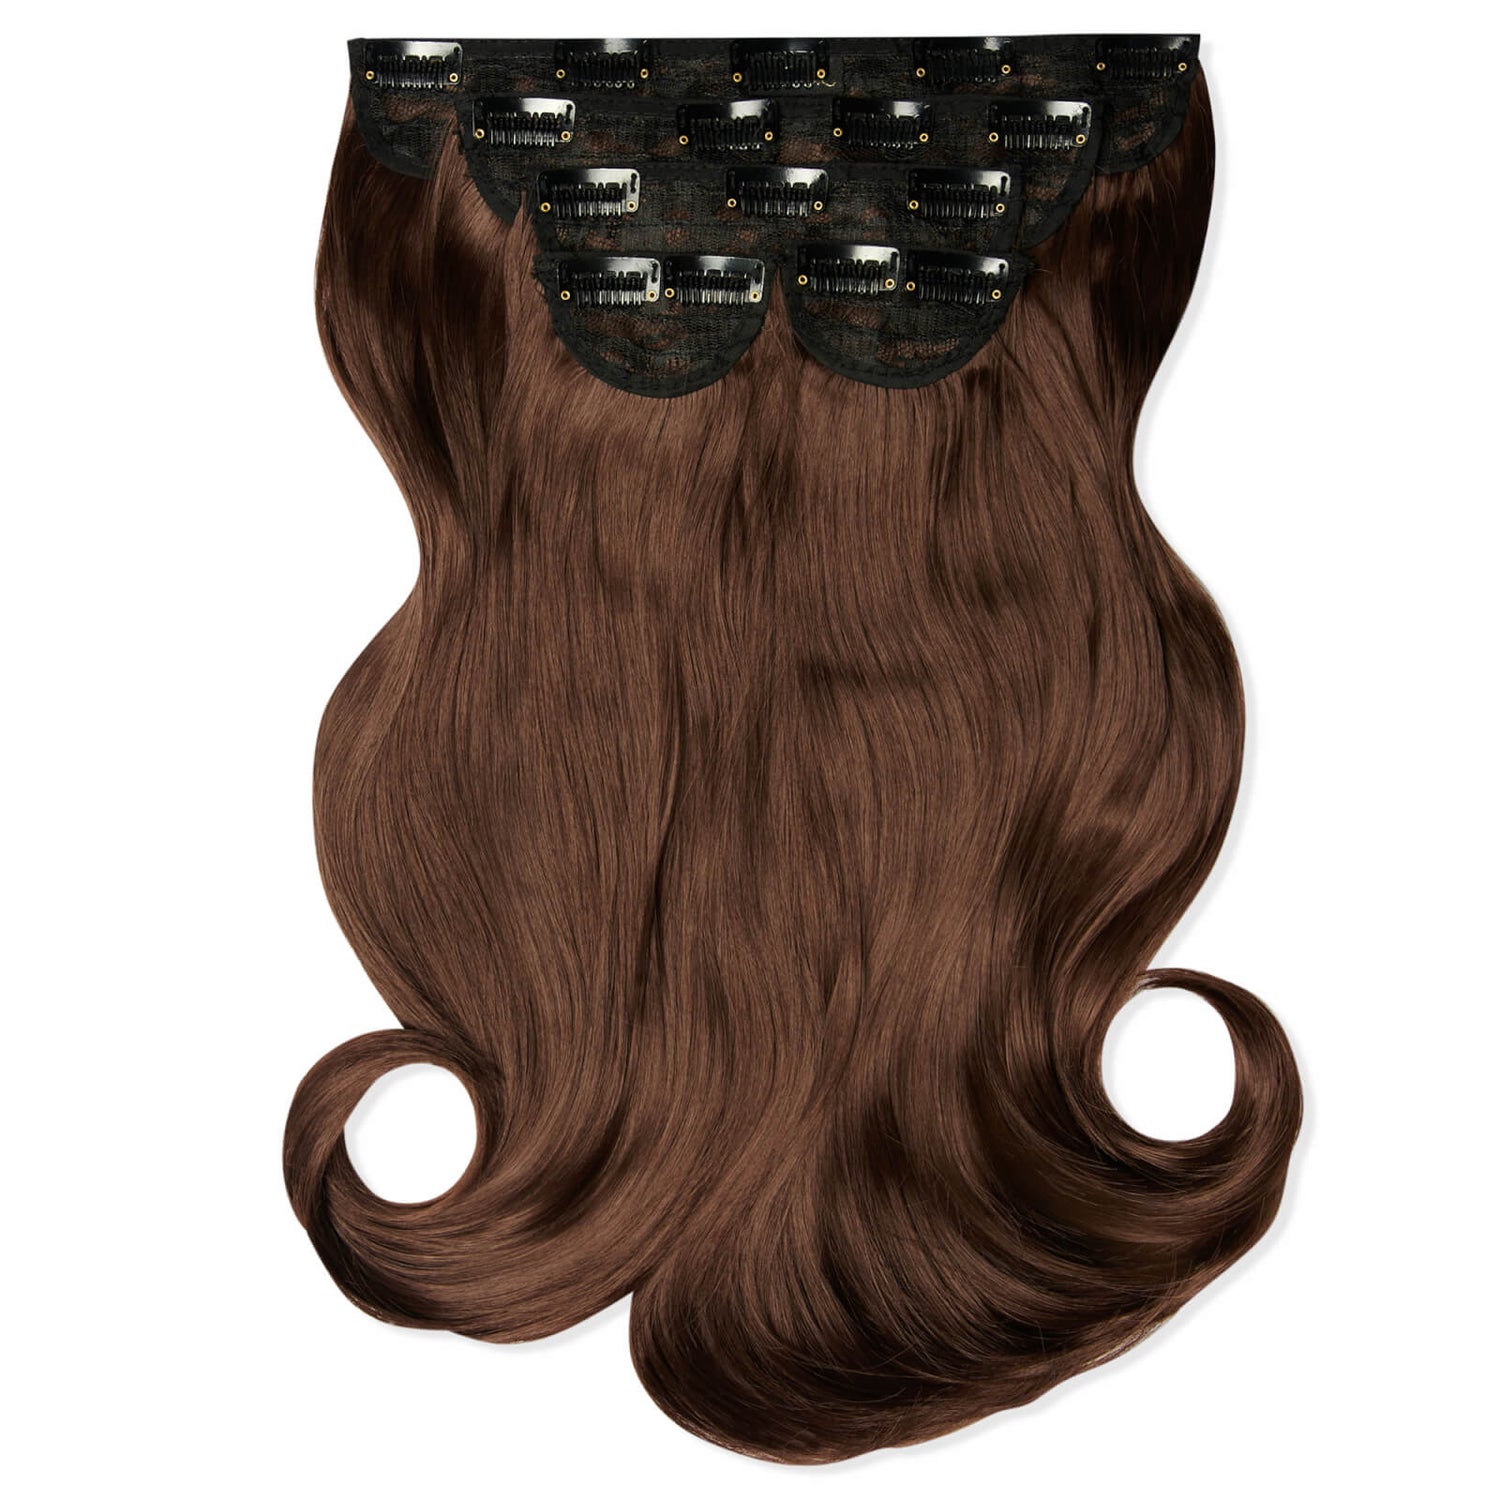 LullaBellz Super Thick 16" 5 Piece Blow Dry Wavy Clip In Extensions (Various Shades)